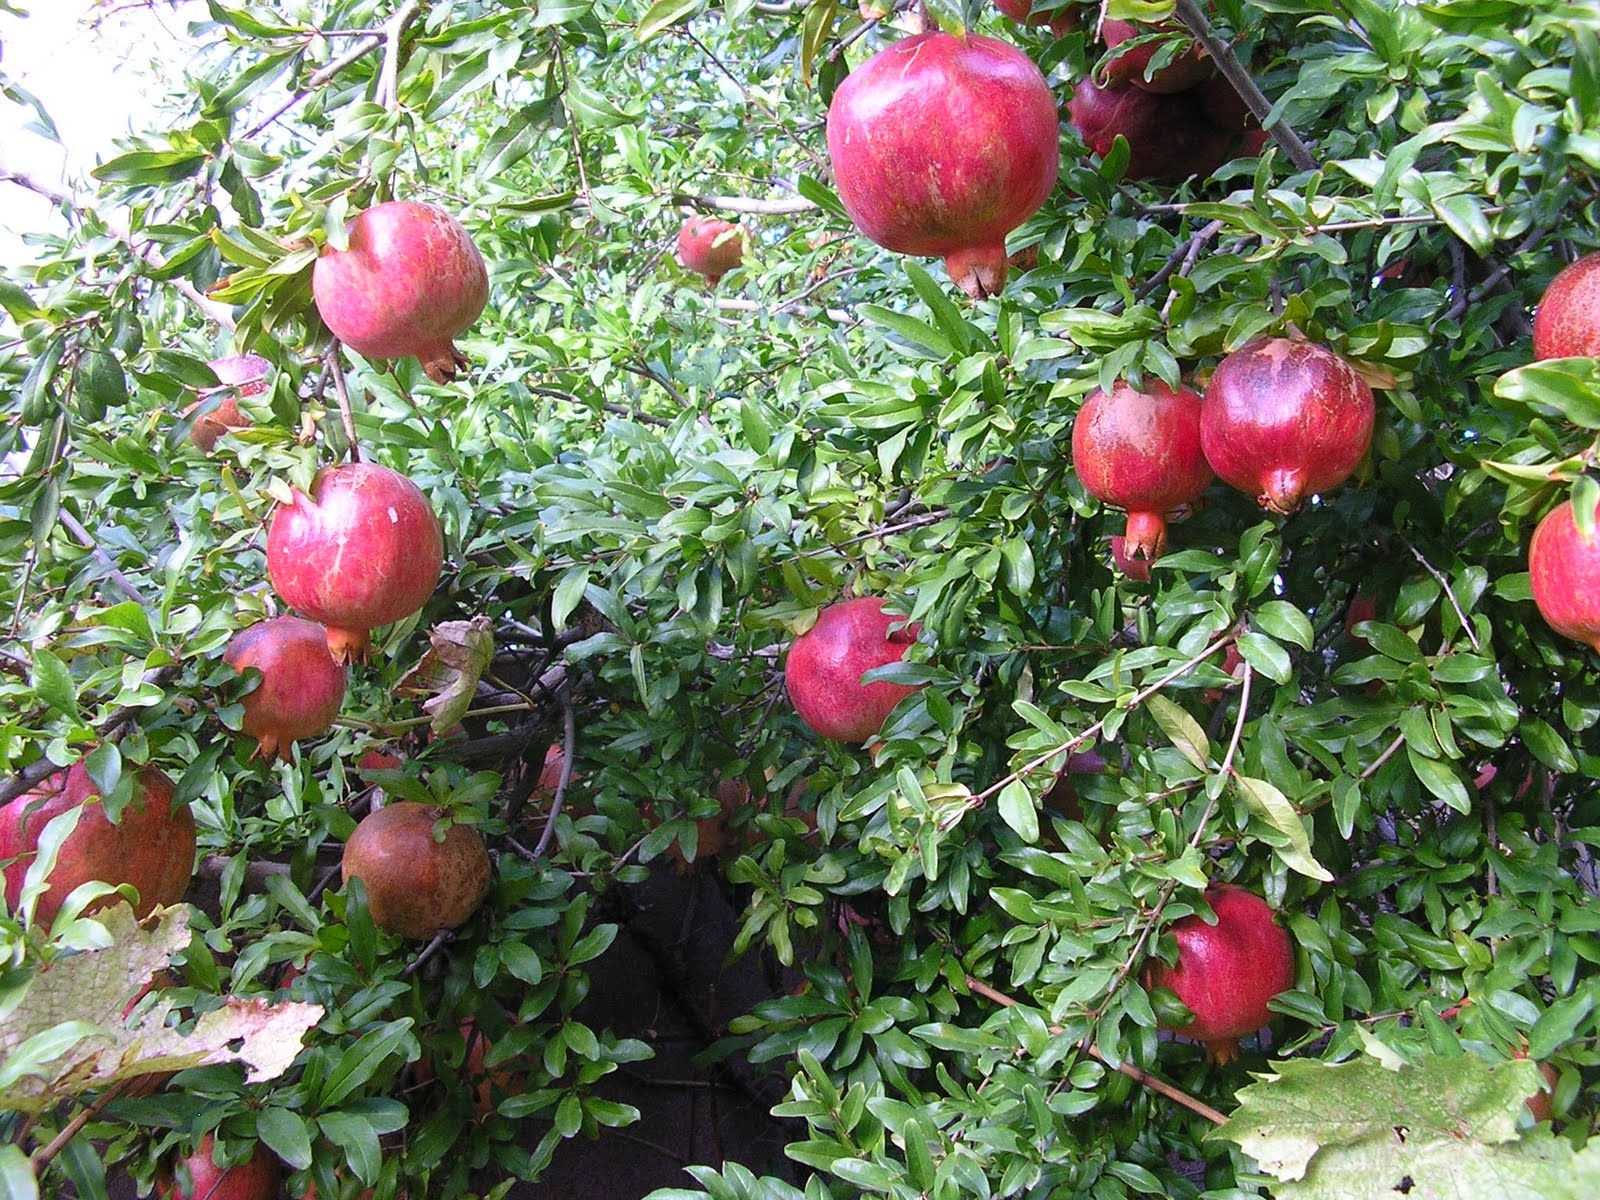 Picking time for pomegranates differs with variety, Home and Garden